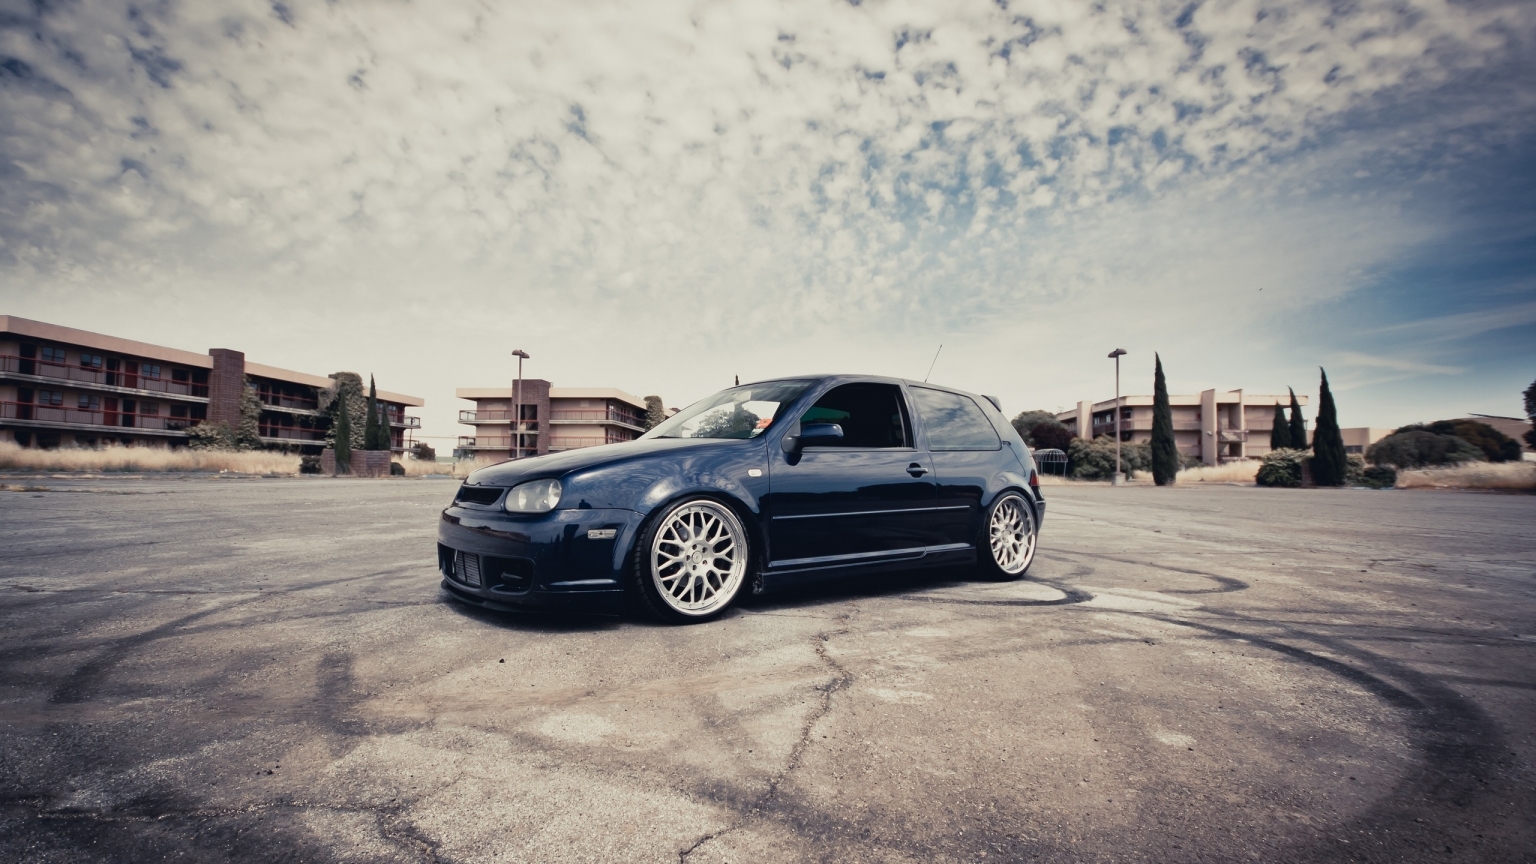 VW Golf III Coupe Tuning for 1536 x 864 HDTV resolution